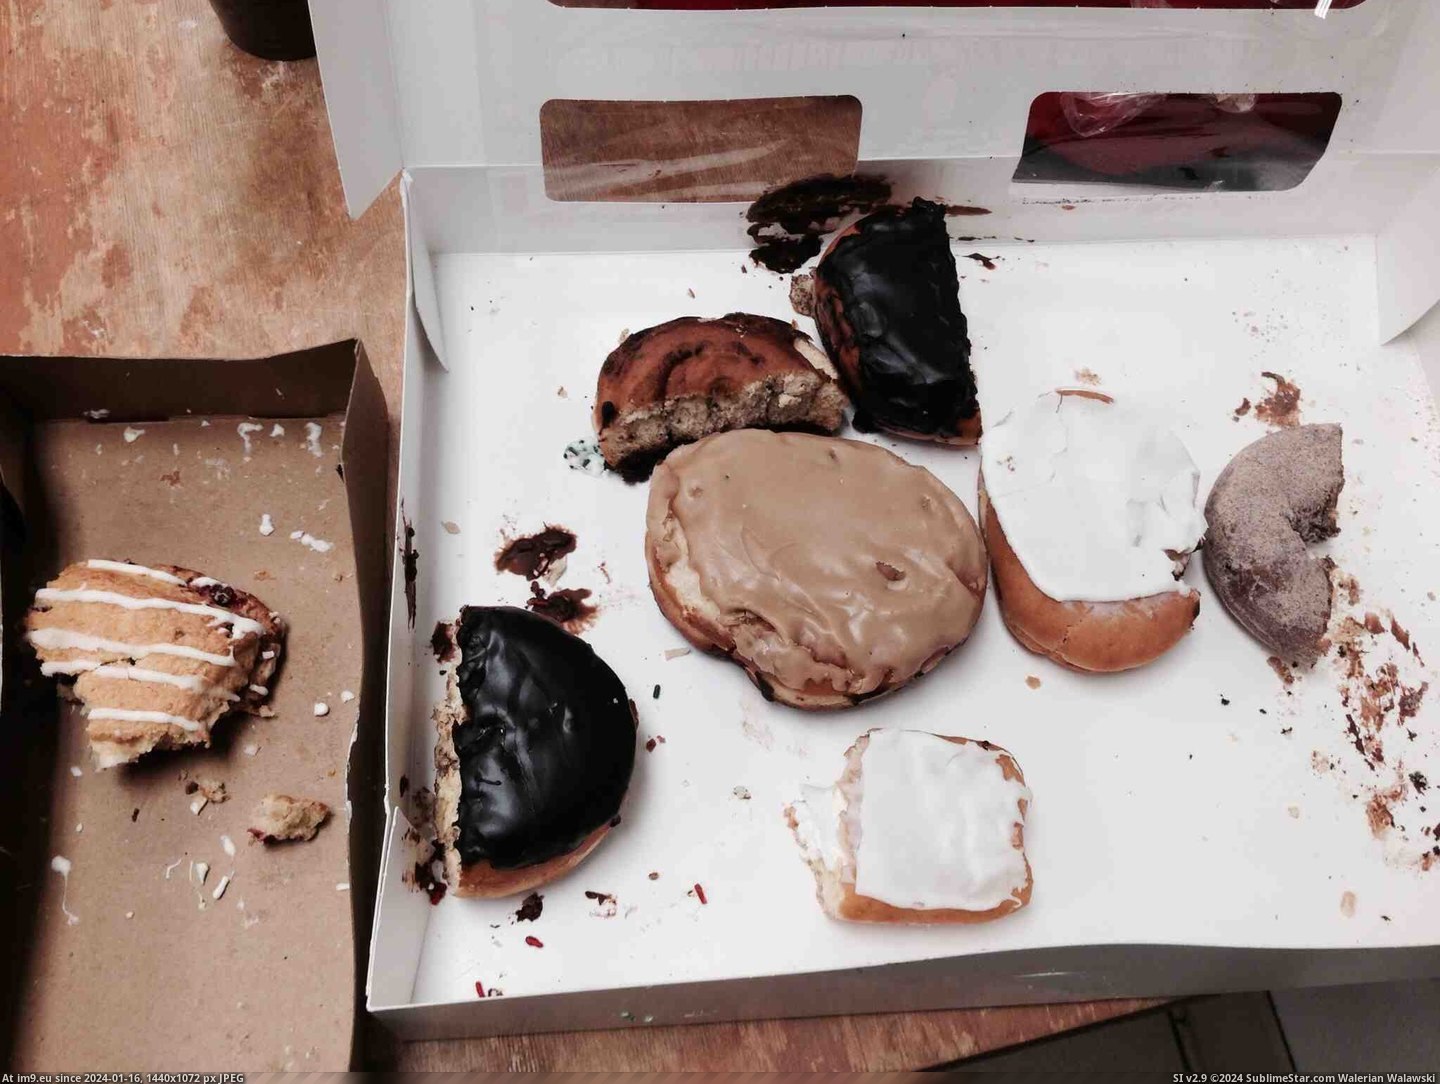 #You #Work #Females #Donuts #Brings [Pics] This is what happens when someone brings in donuts and you work with many females. Pic. (Obraz z album My r/PICS favs))